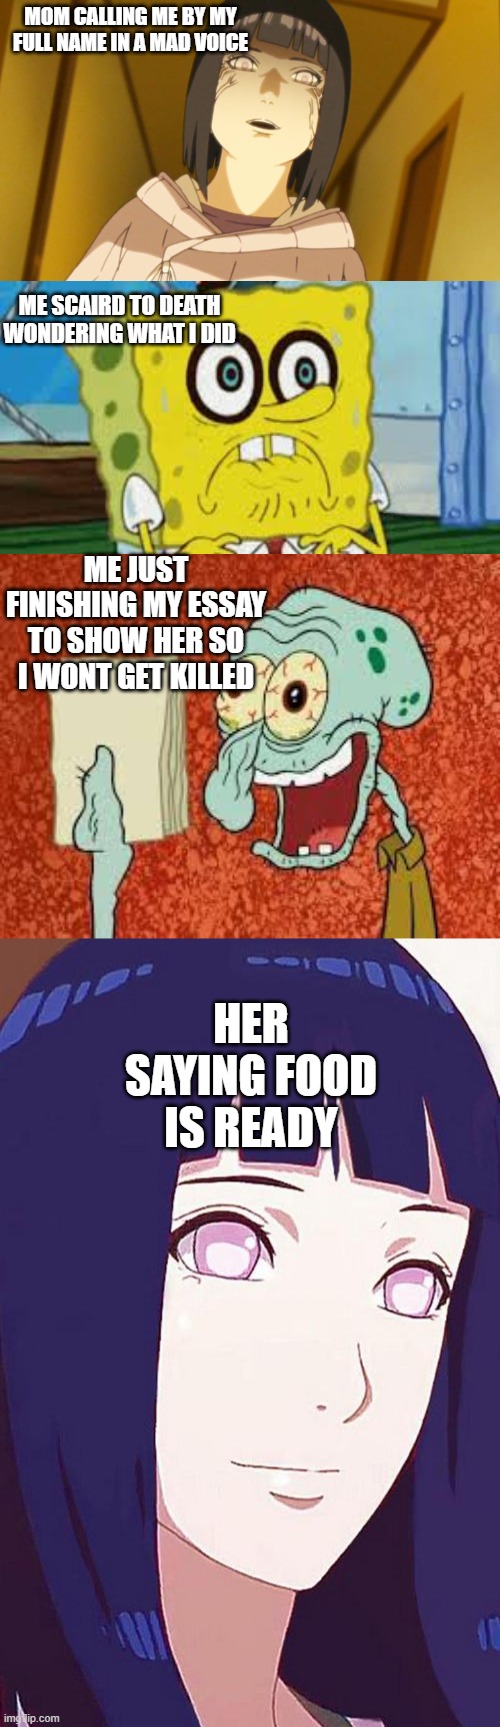 ha | MOM CALLING ME BY MY FULL NAME IN A MAD VOICE; ME SCAIRD TO DEATH WONDERING WHAT I DID; ME JUST FINISHING MY ESSAY TO SHOW HER SO I WONT GET KILLED; HER SAYING FOOD IS READY | image tagged in funny | made w/ Imgflip meme maker